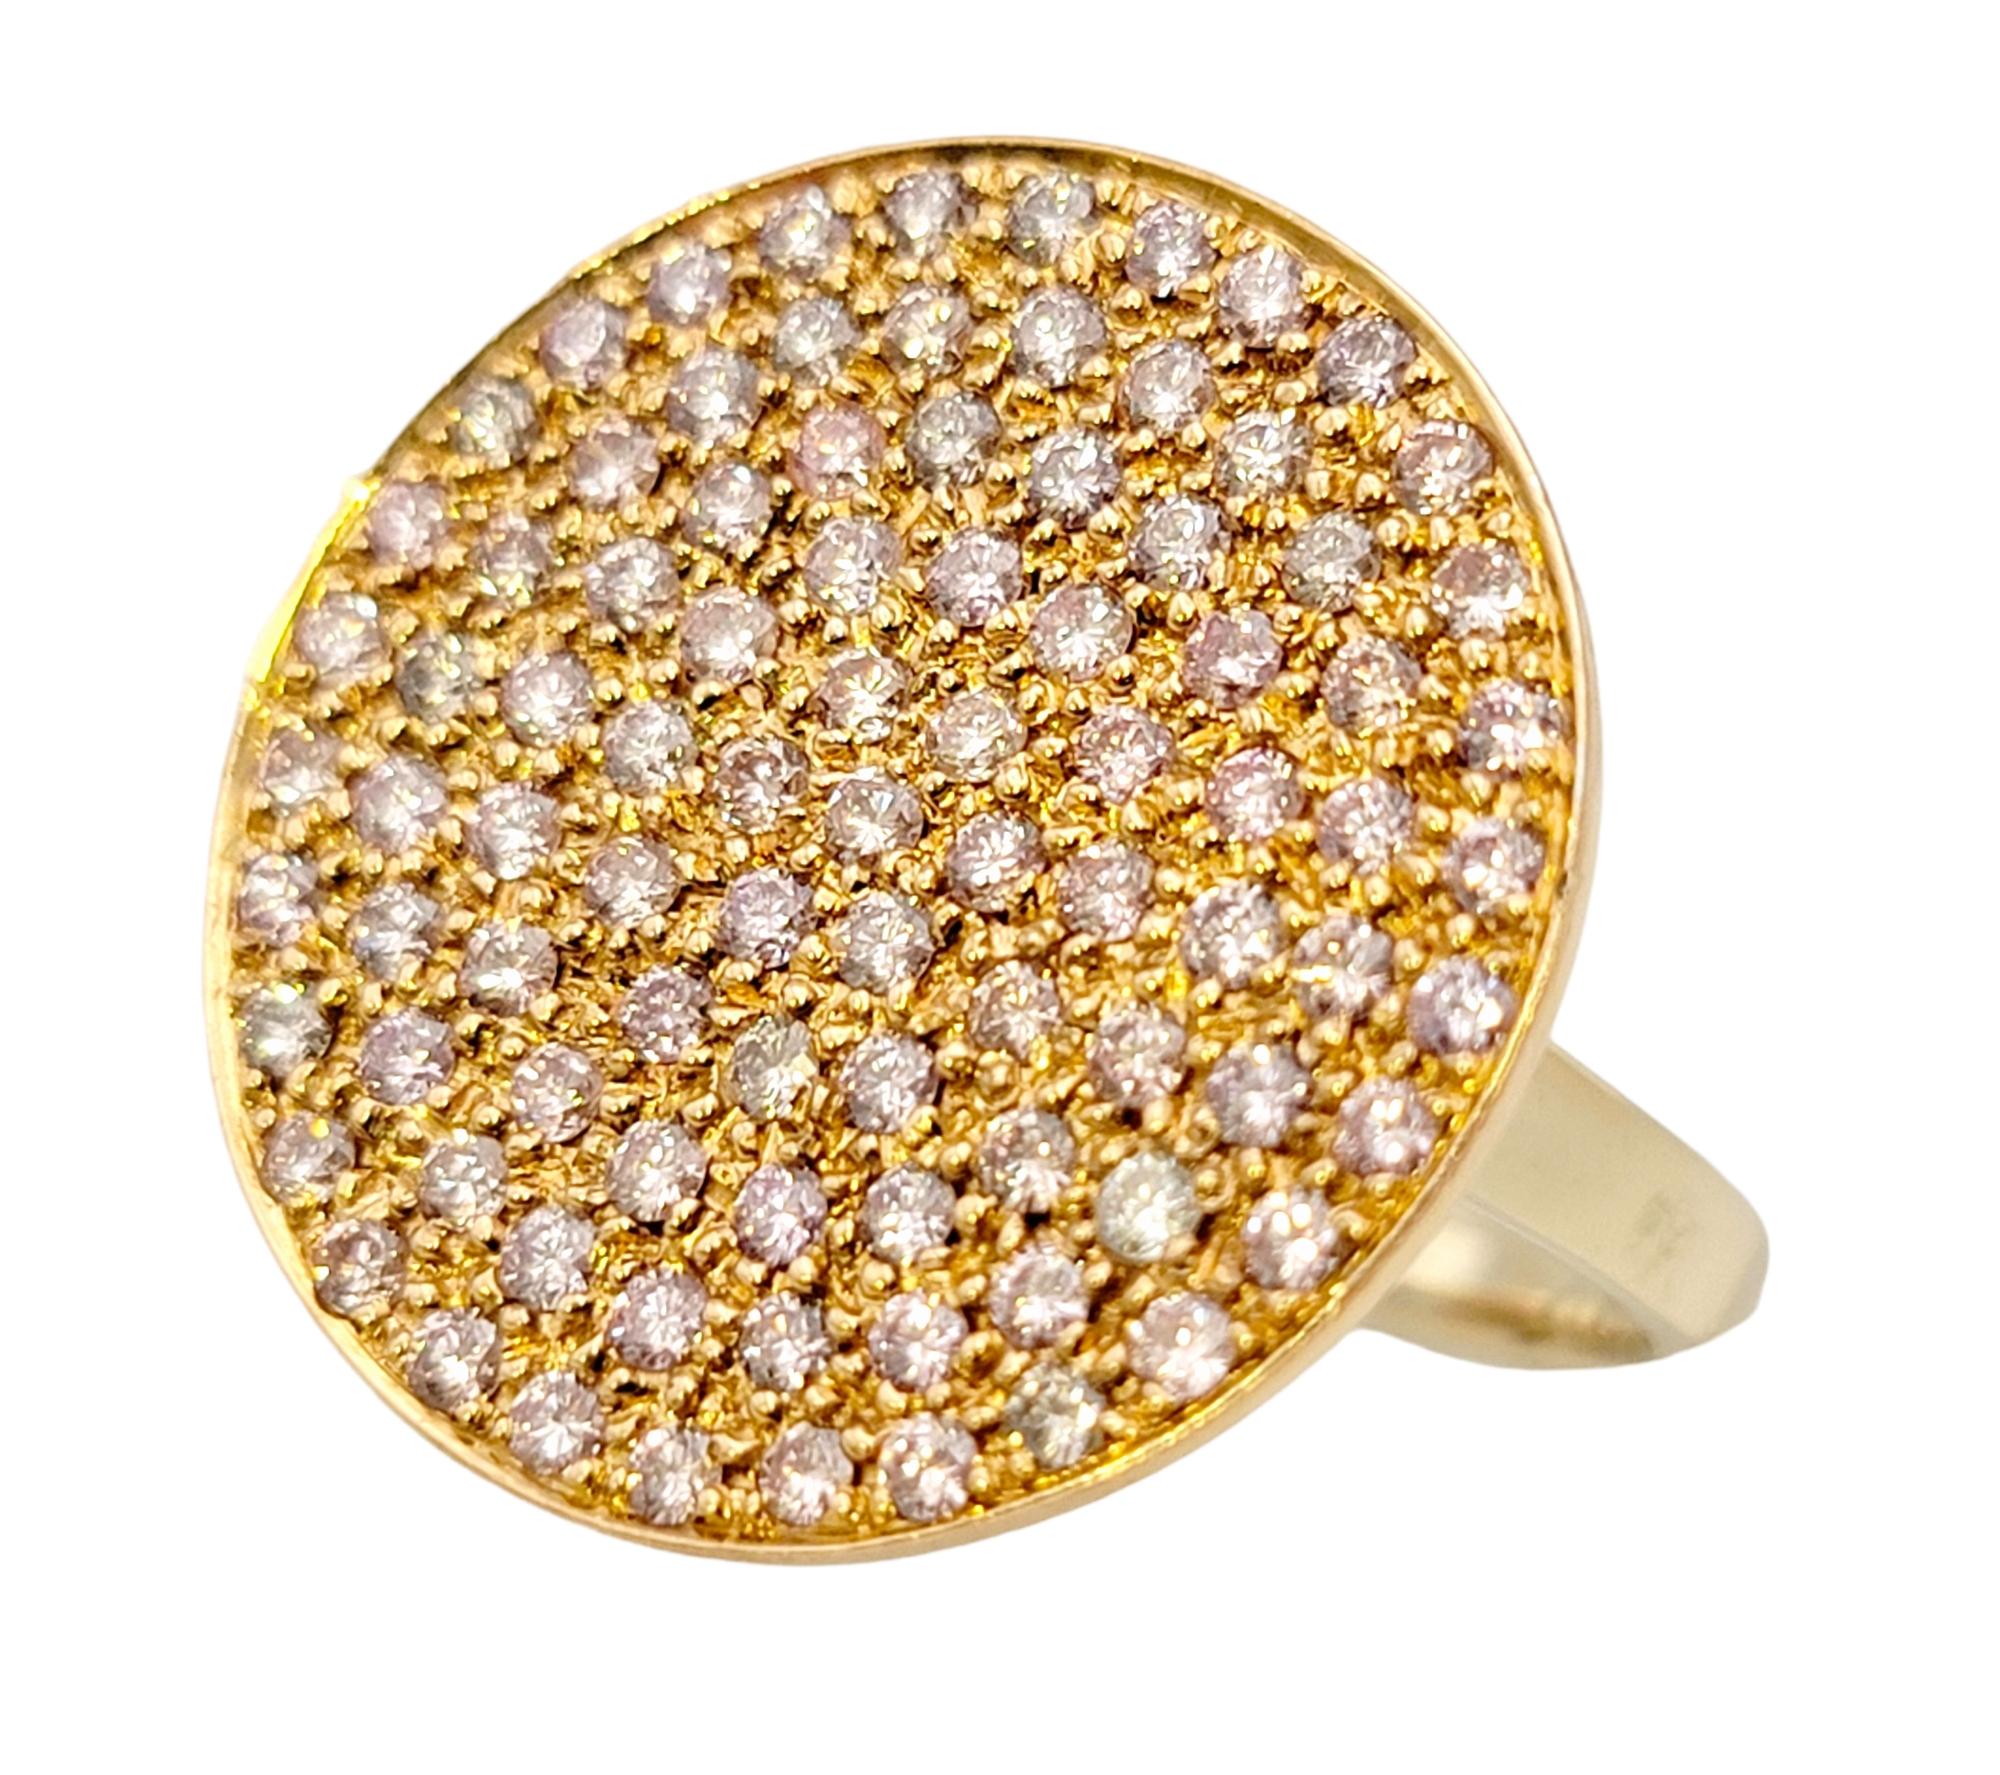 Ring size: 7.5

This bright, beautiful pink diamond disc ring is absolutely bursting with sparkle! Featuring 91 natural fancy light pink pave set diamonds in a large circular setting, this multi-tone gold ring really fills the finger with dazzling